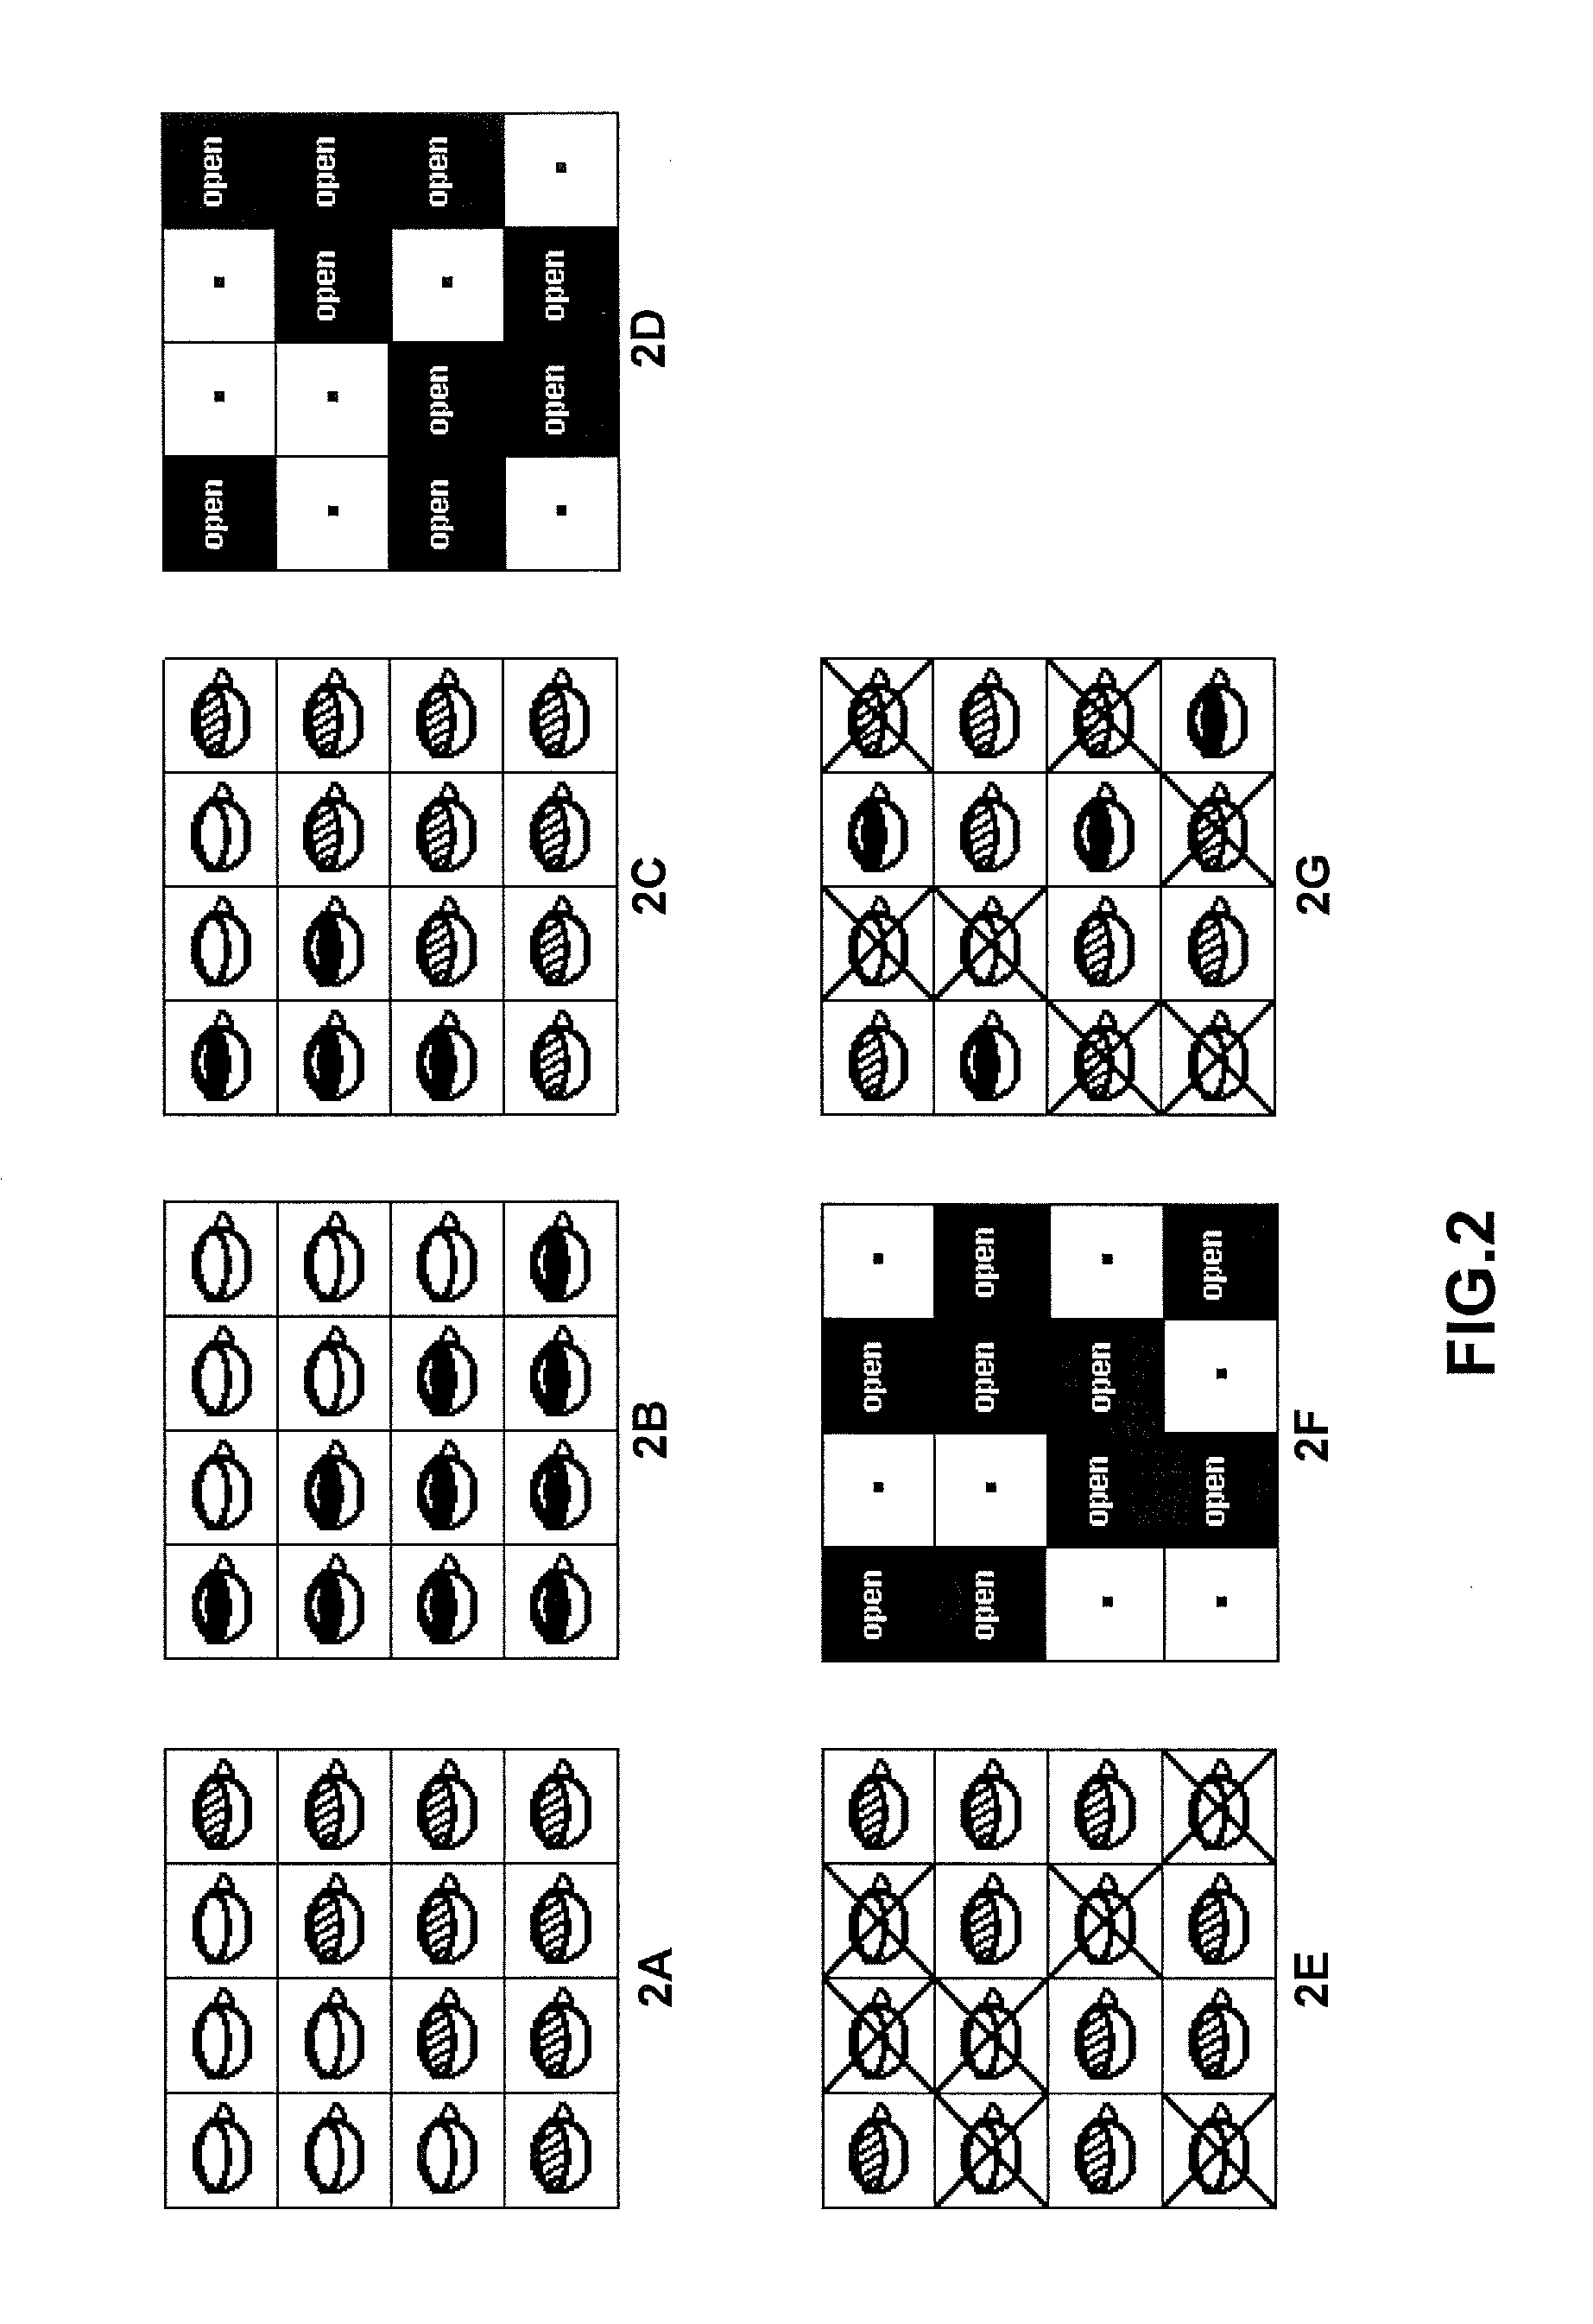 Method and apparatus for rendering Anti-aliased graphic objects